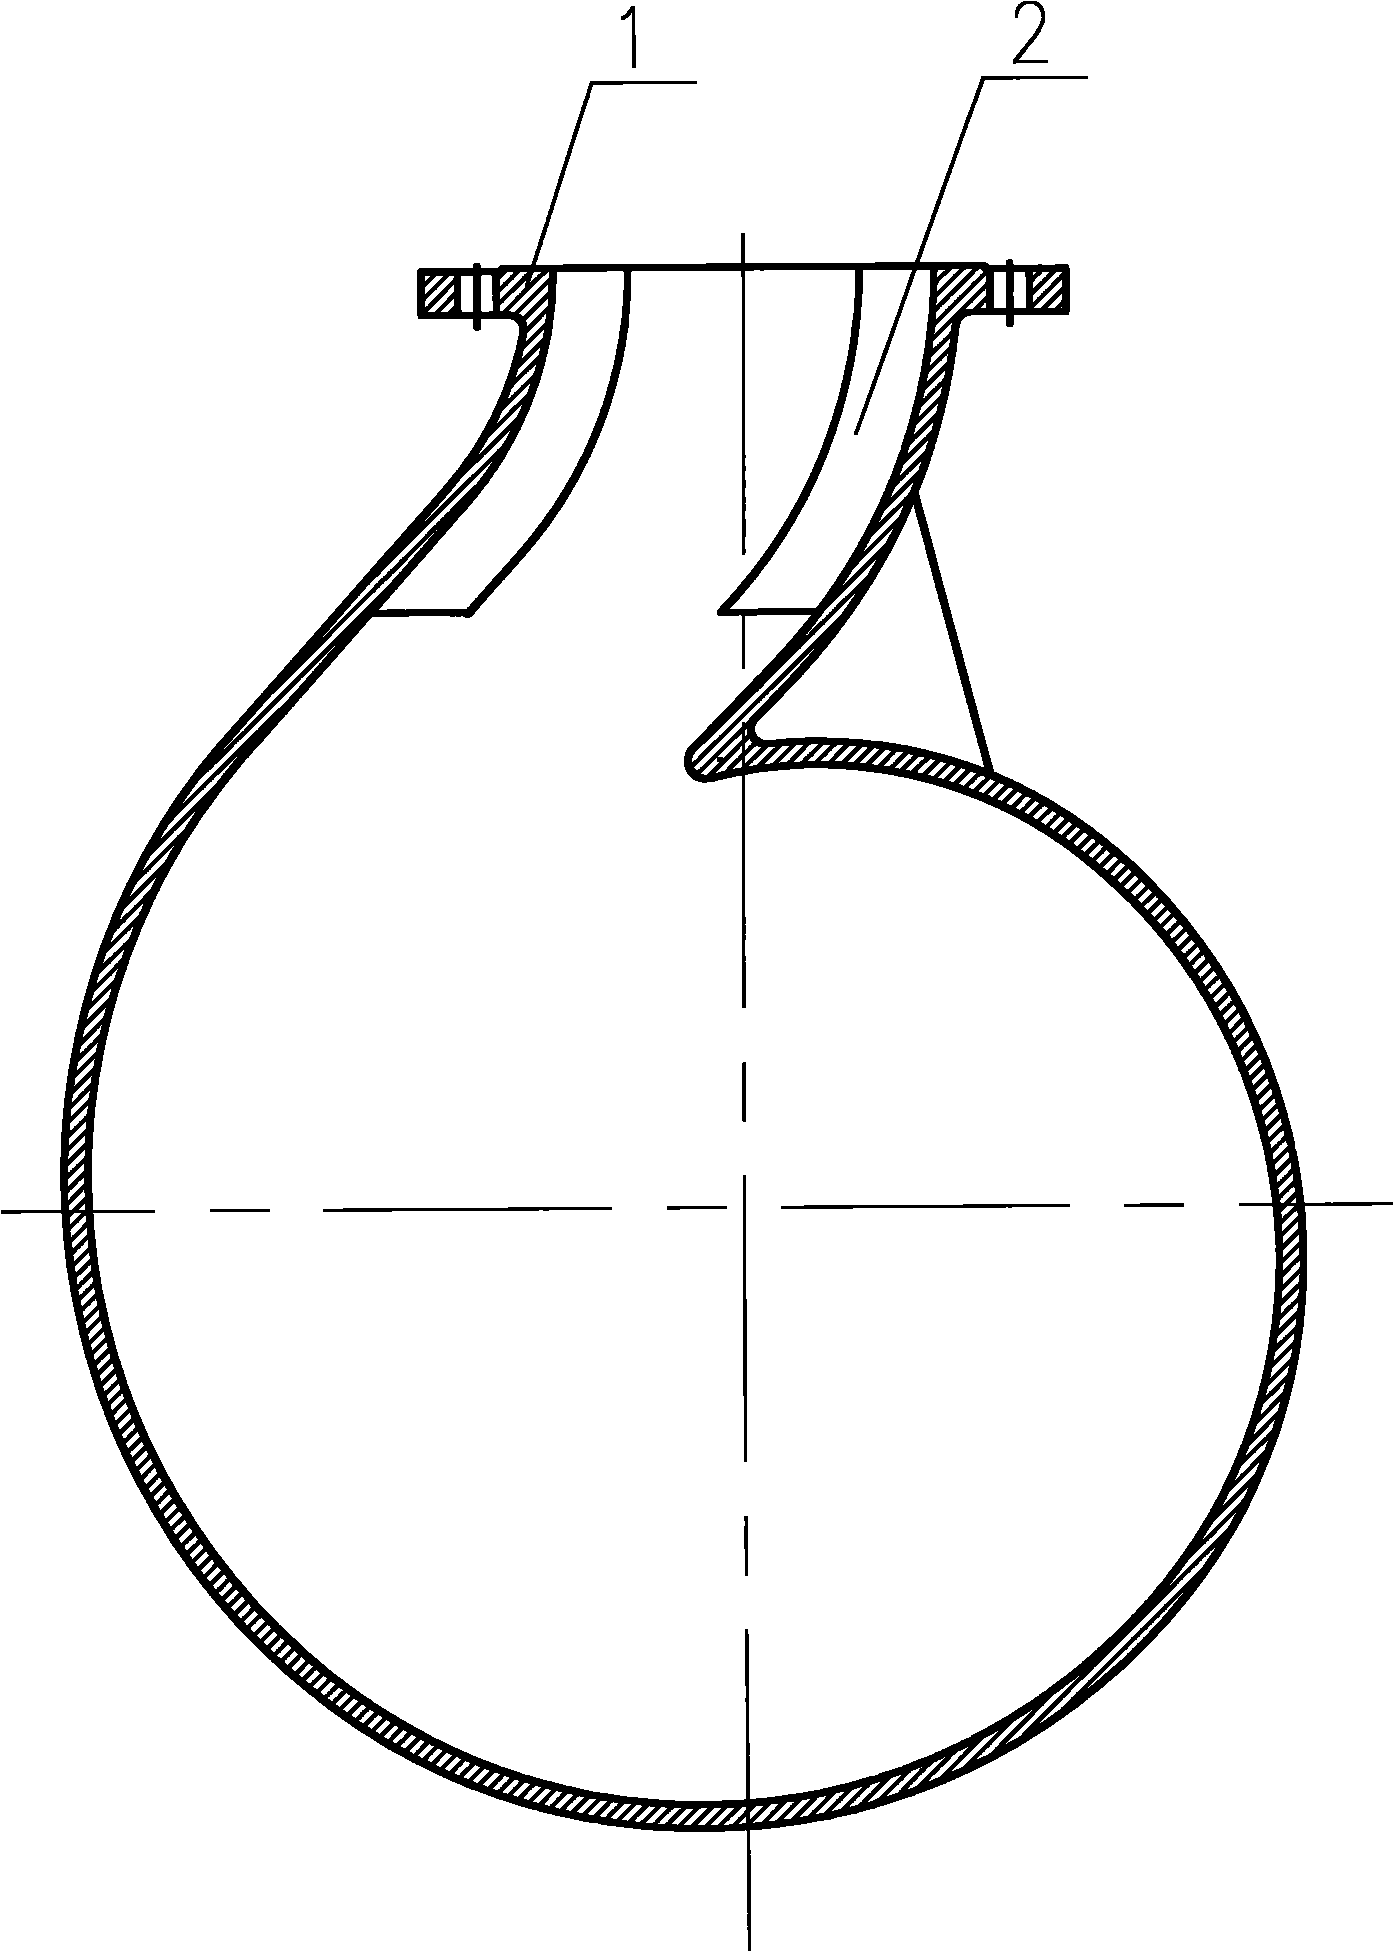 Spiral casing of low-vibration and low-noise centrifugal pump